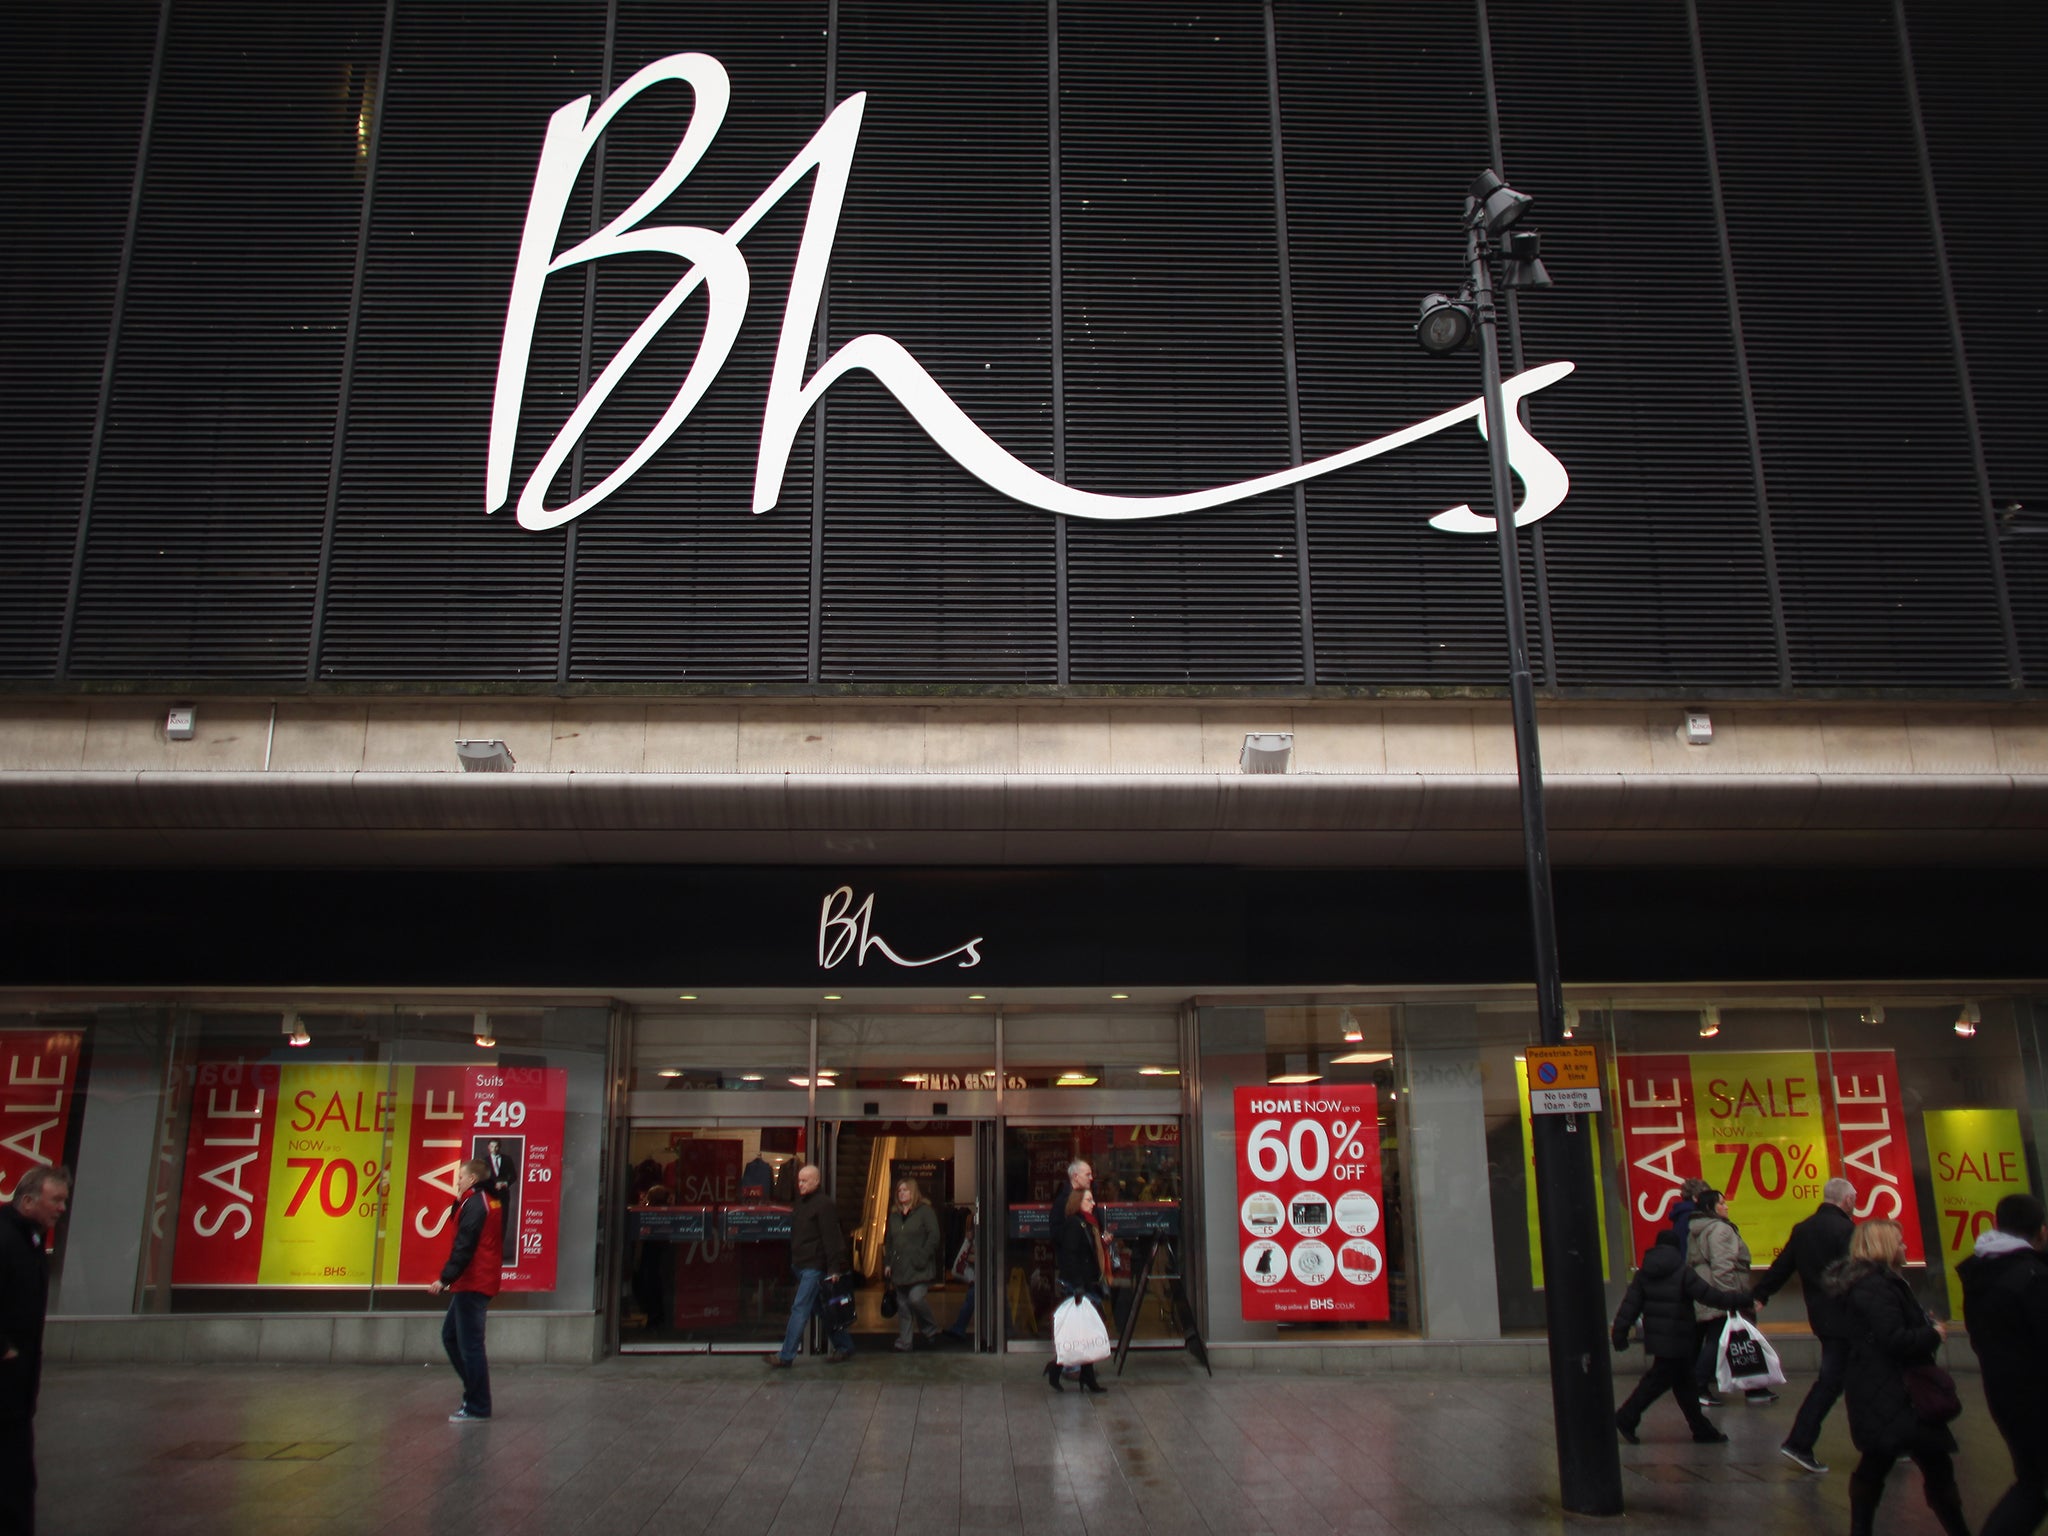 BHS employs around 8,500 people directly and another 1,500 on contracts